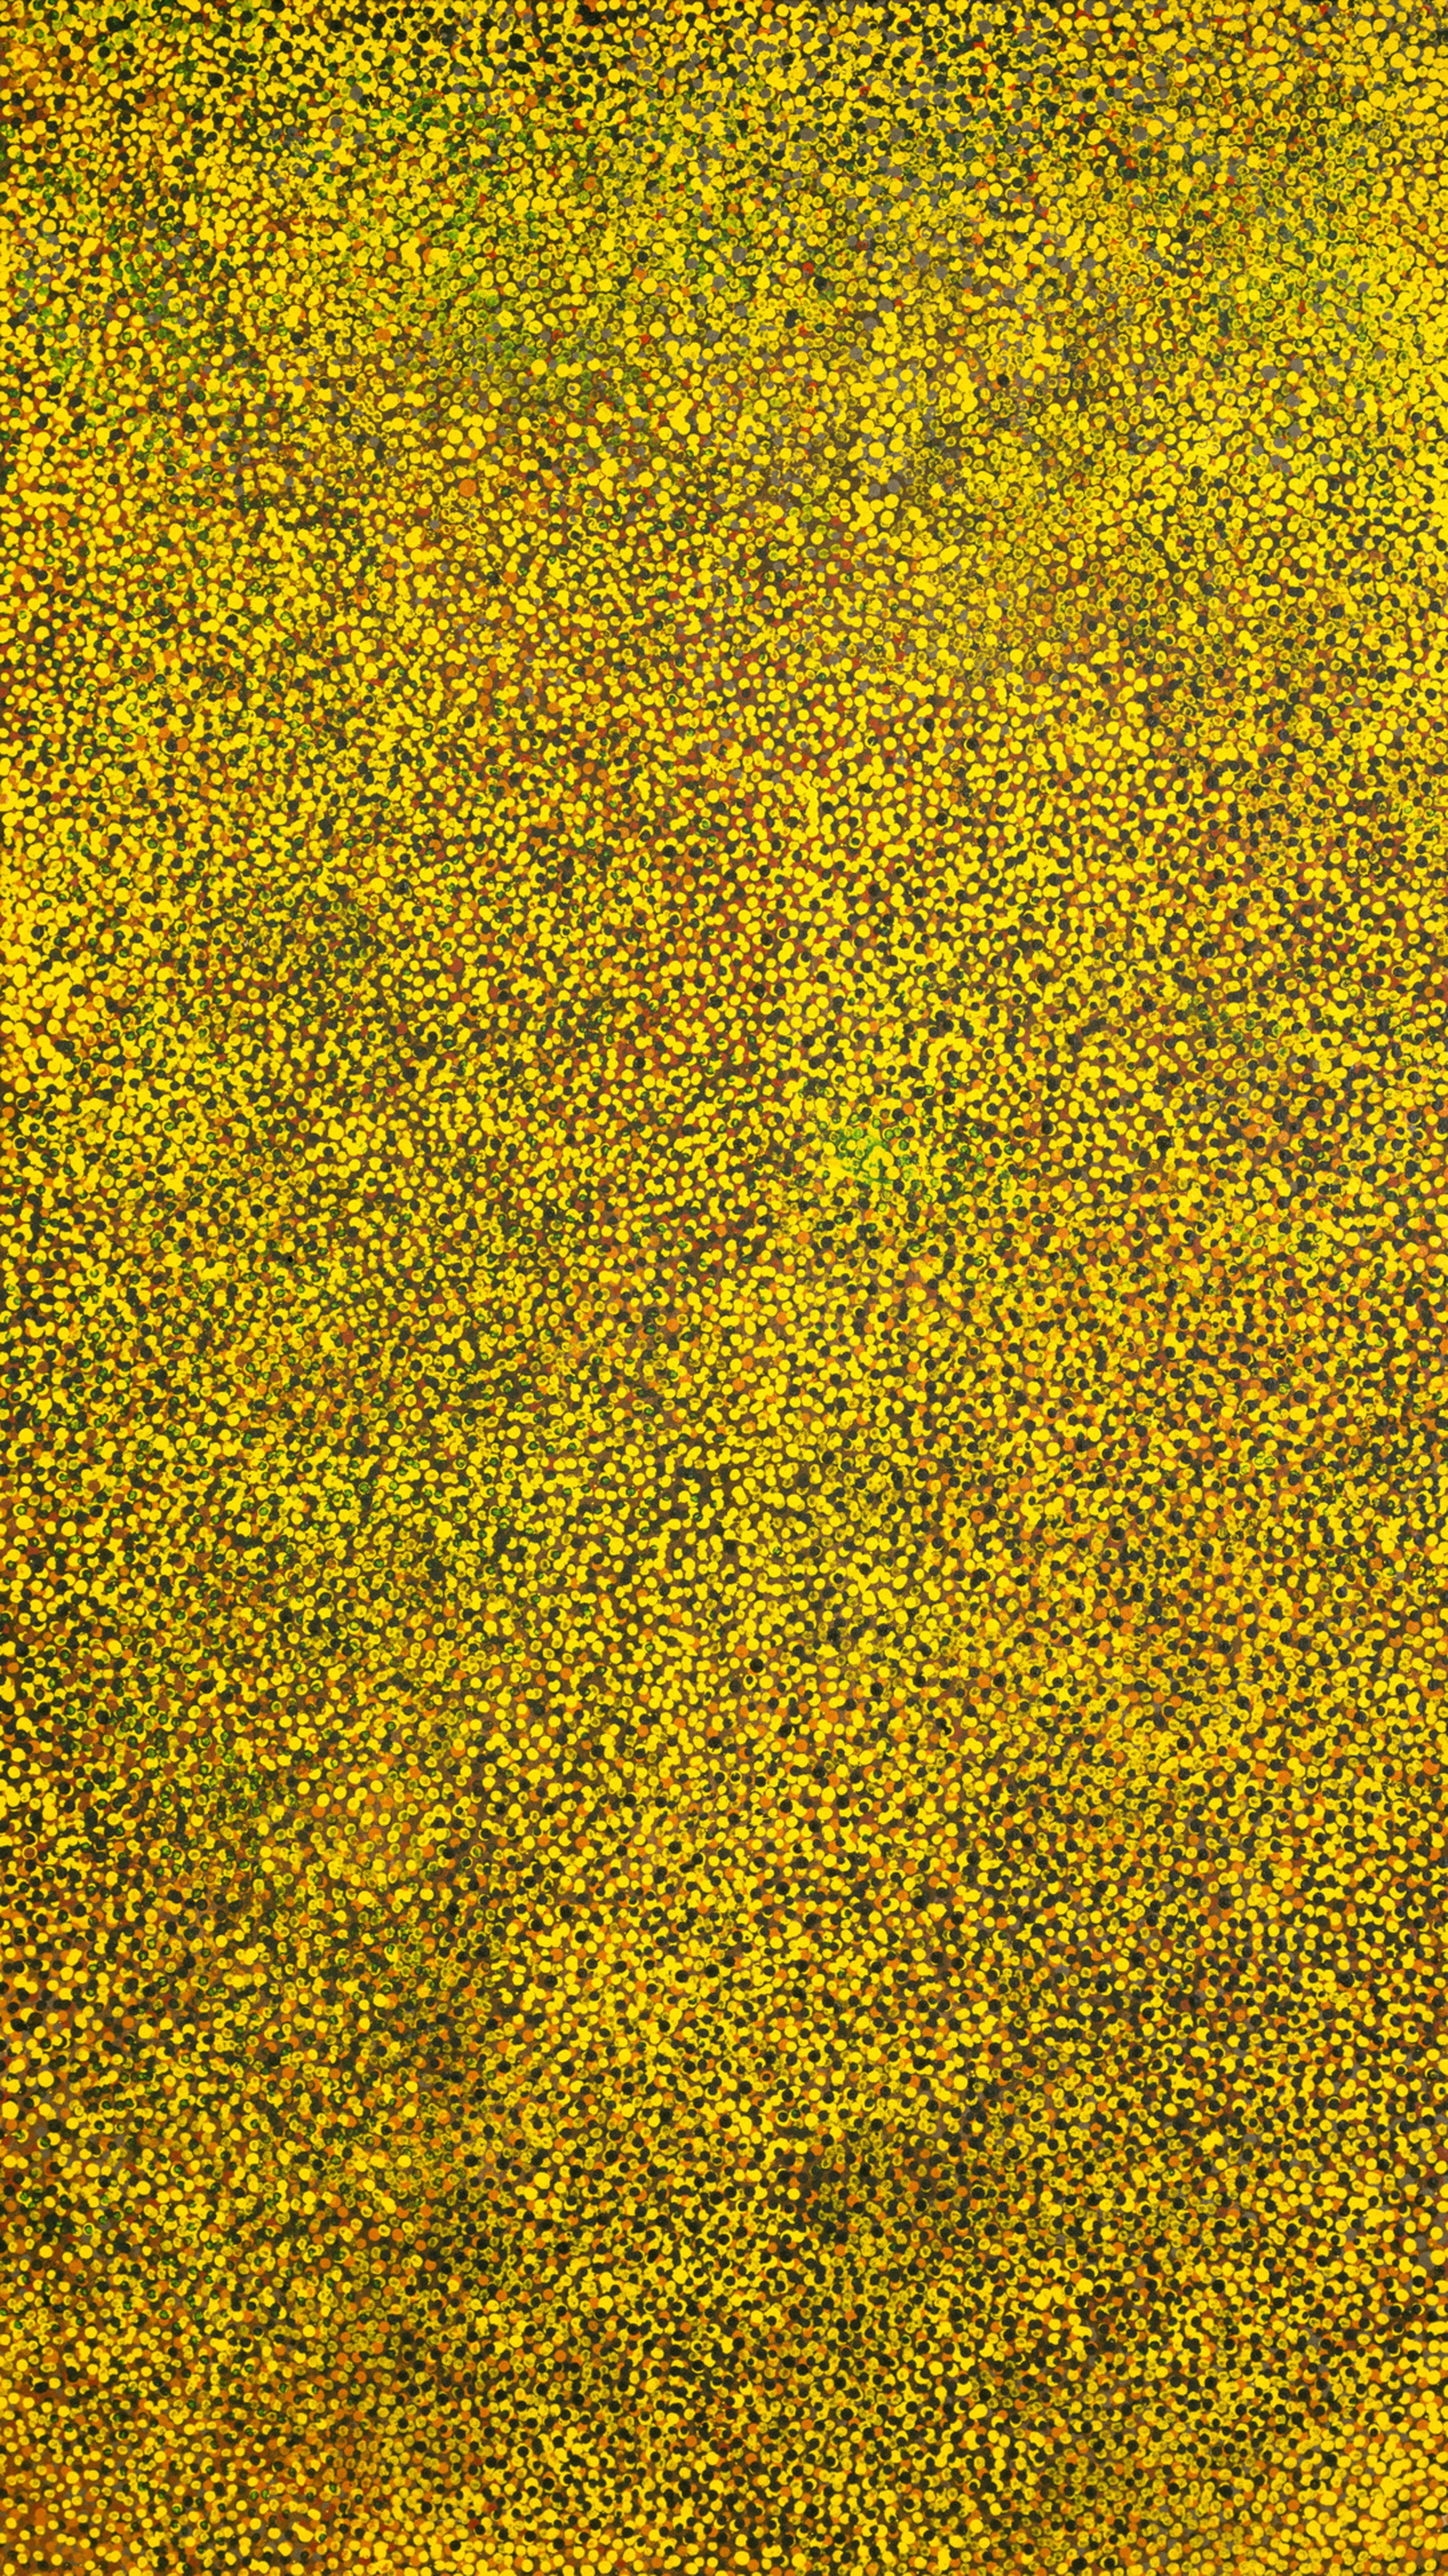 Lots of painted small yellow dots representing seeds on a brown background